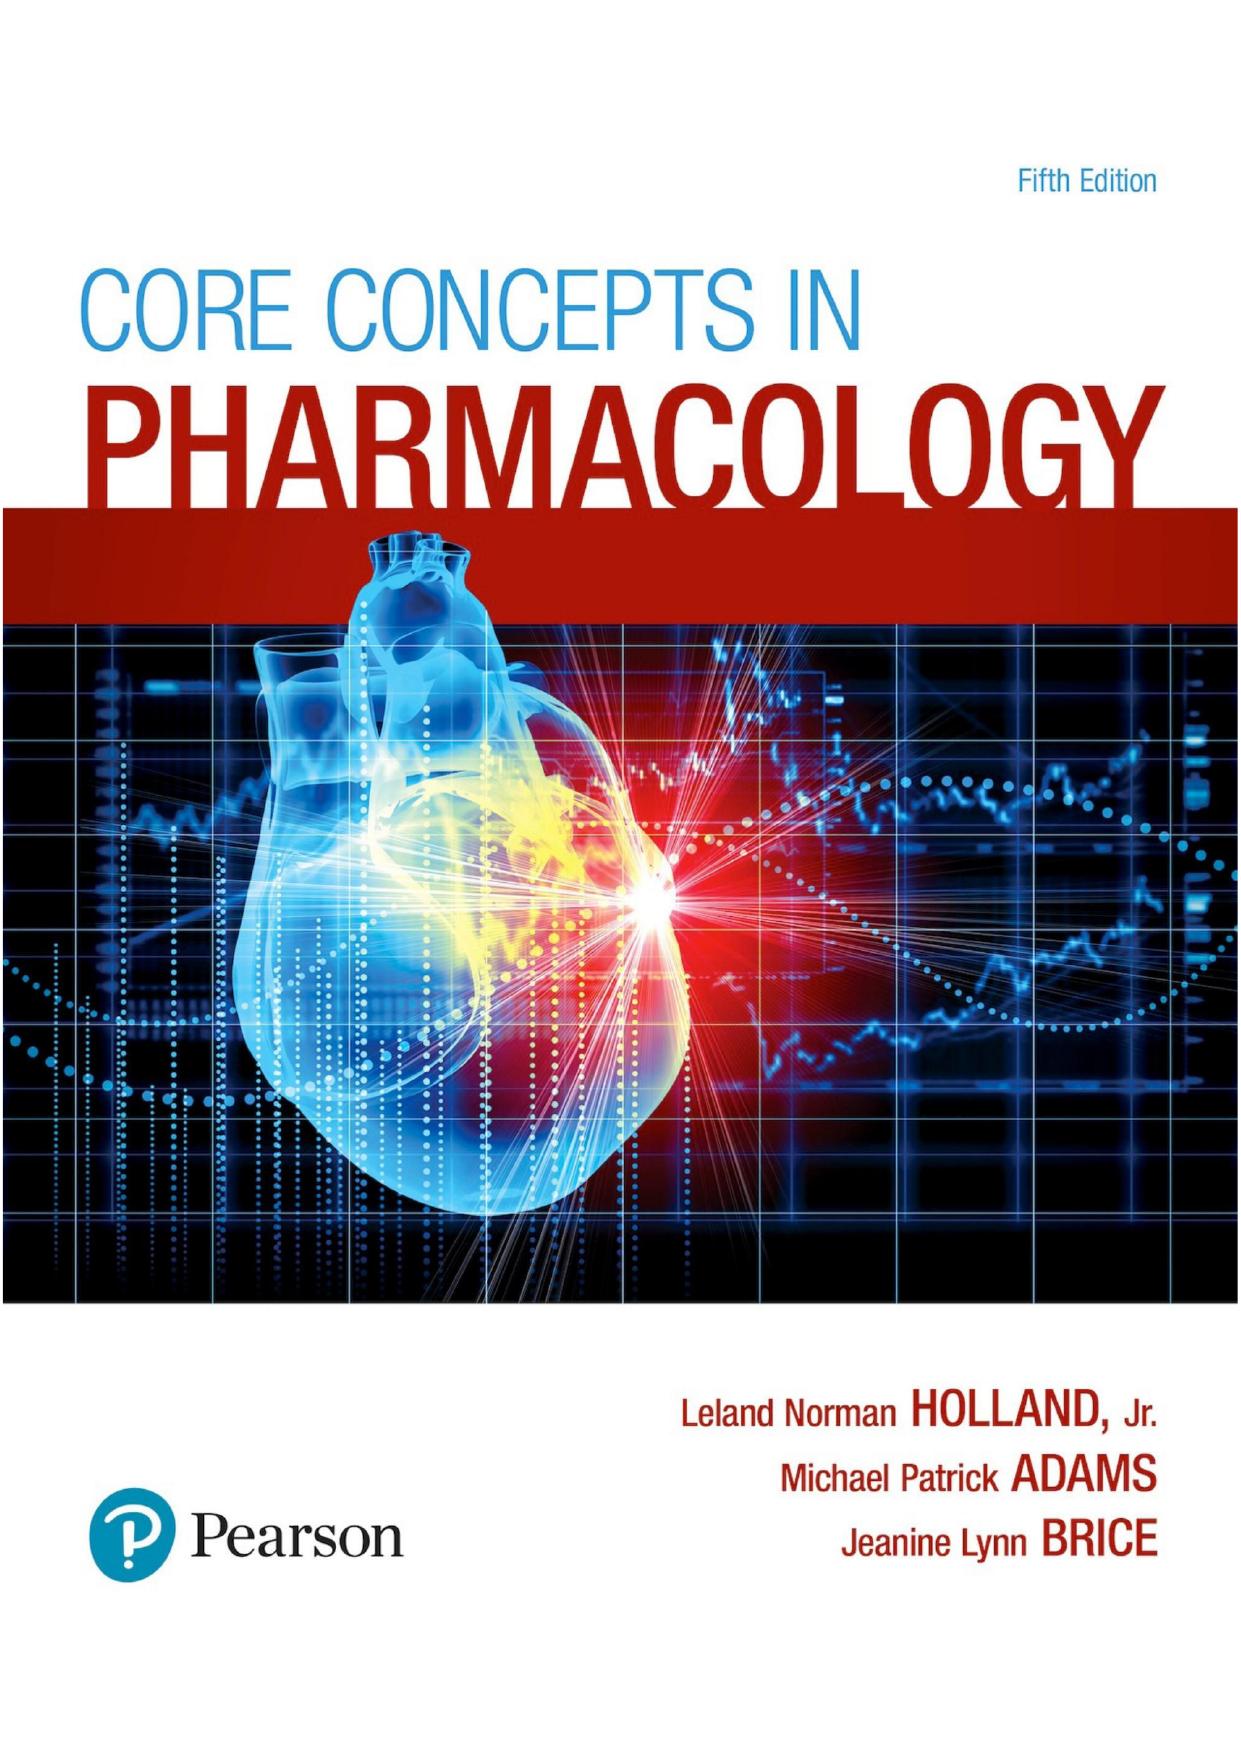 Core Concepts in Pharmacology 5th by Leland Norman - Administrator.jpg